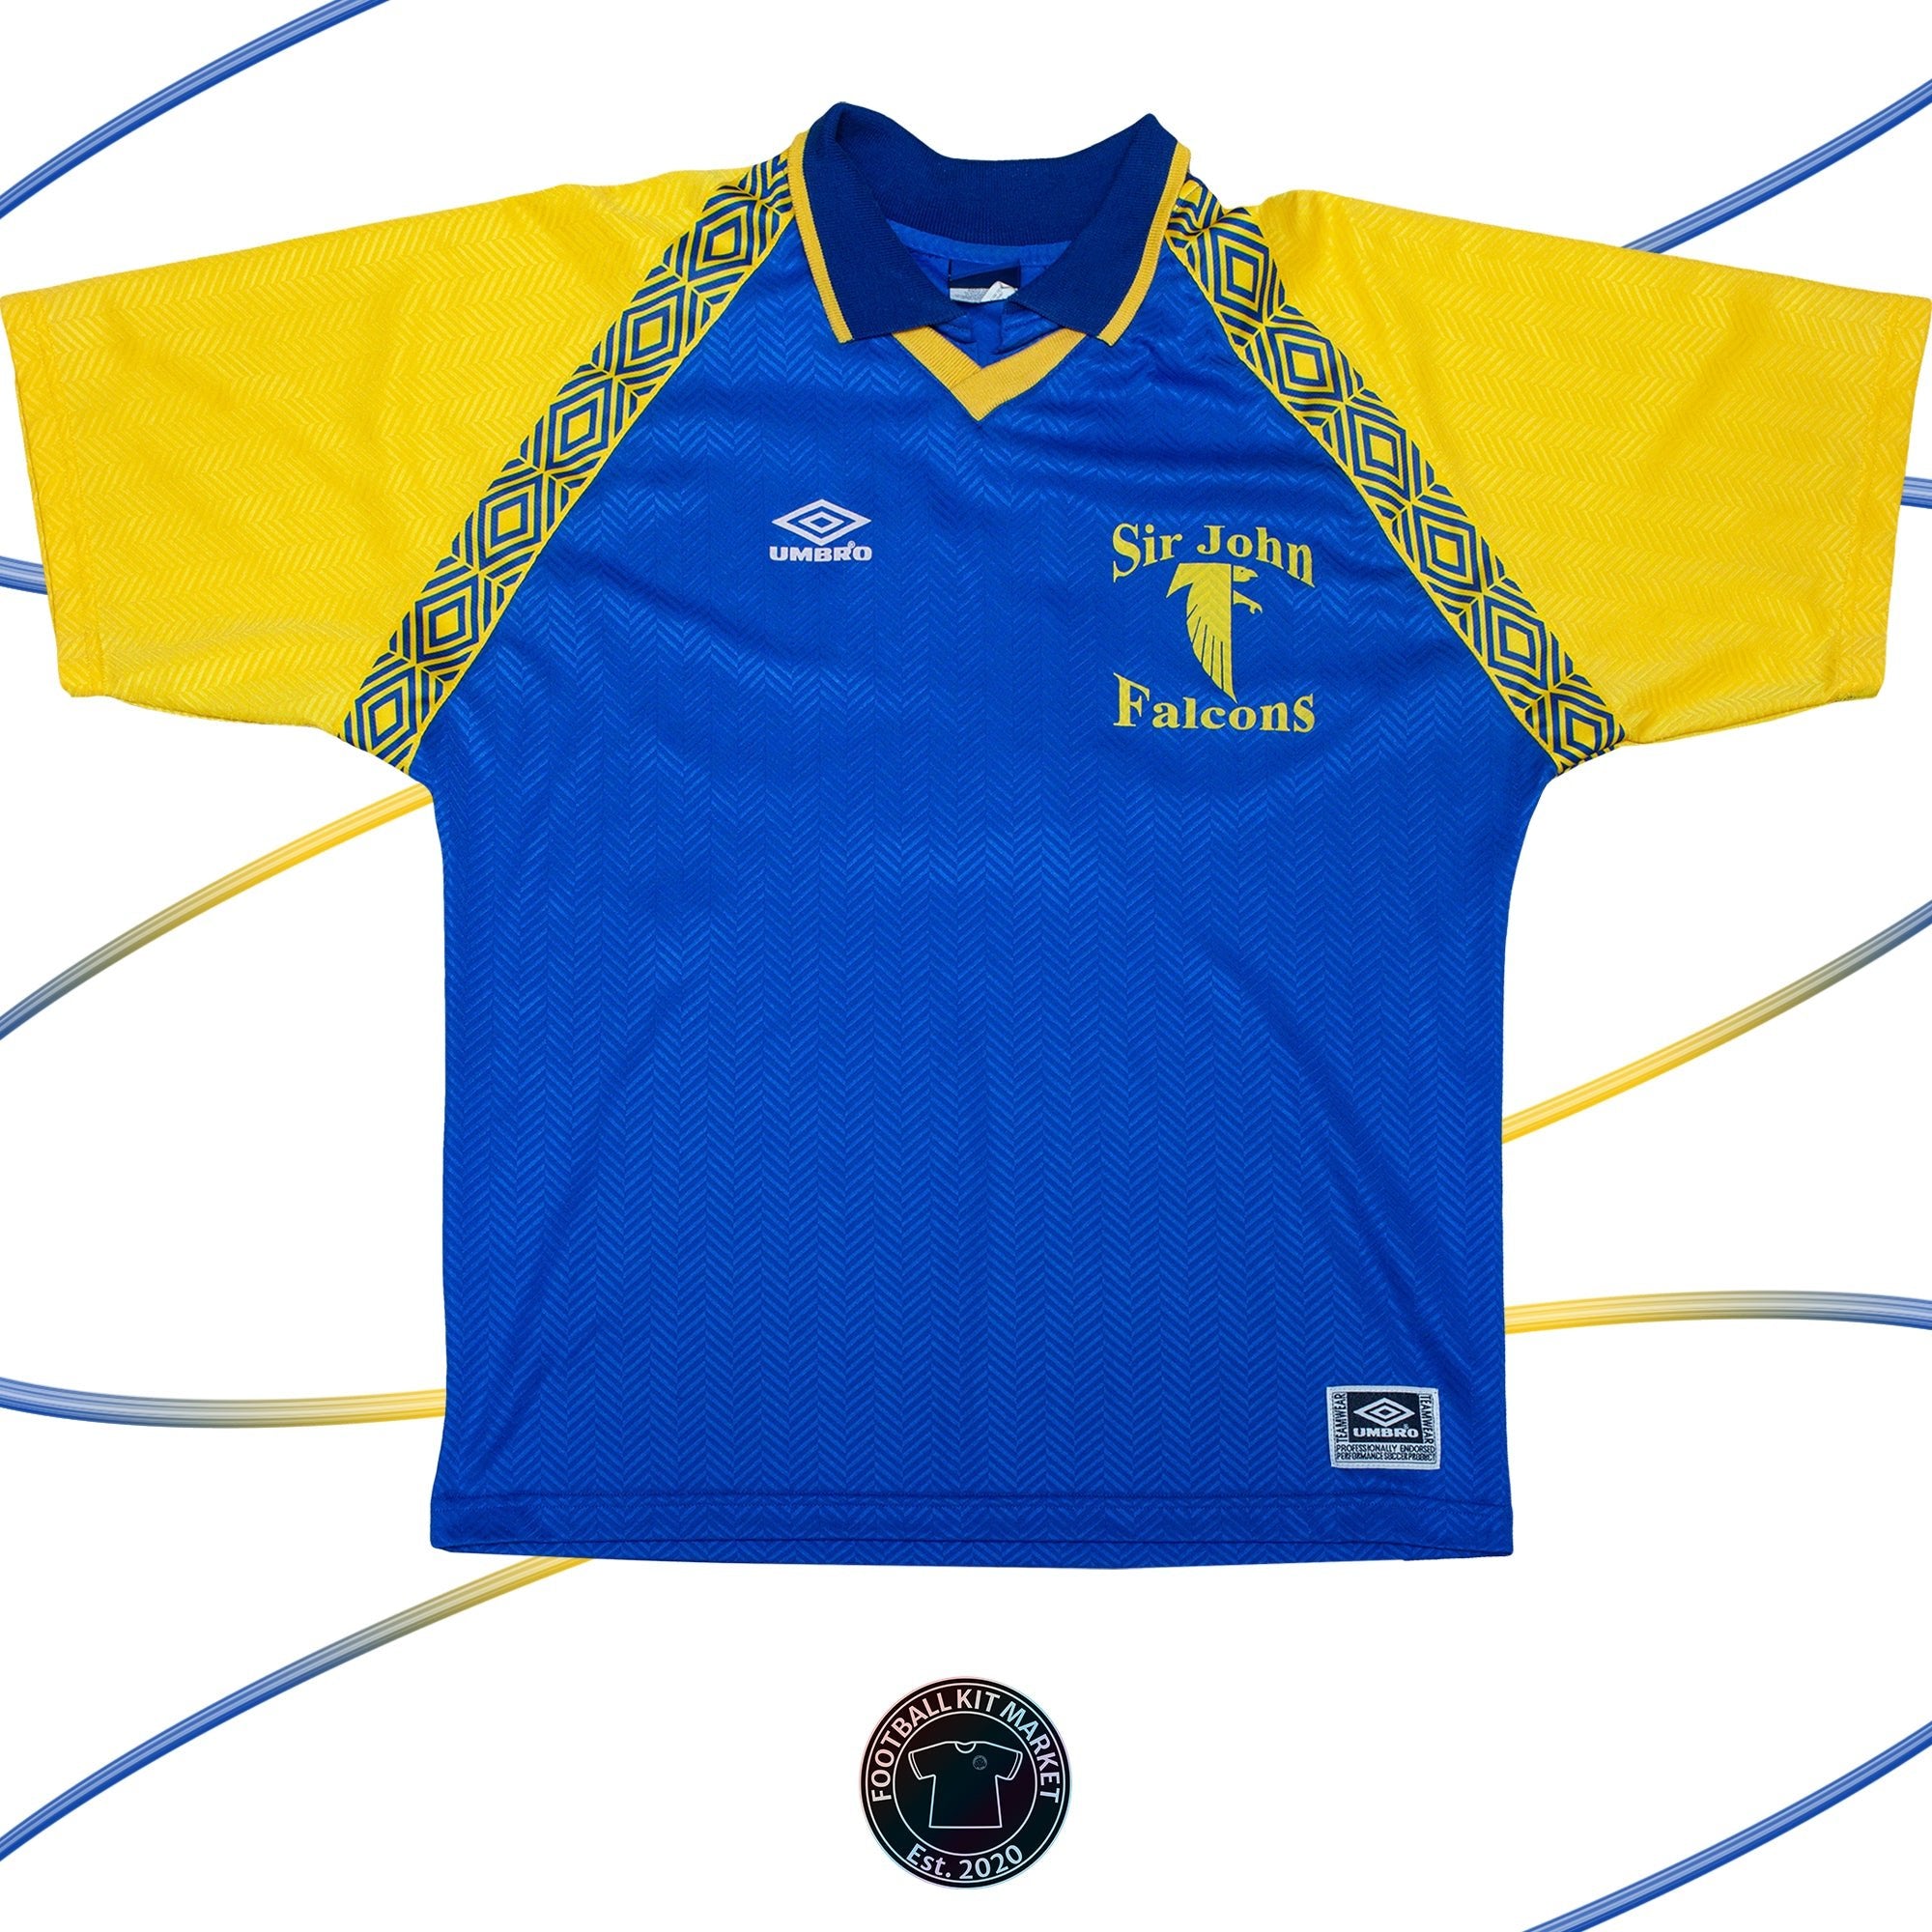 Genuine SIR JOHN FALCONS - 1990s UMBRO TEMPLATE (L) - Product Image from Football Kit Market